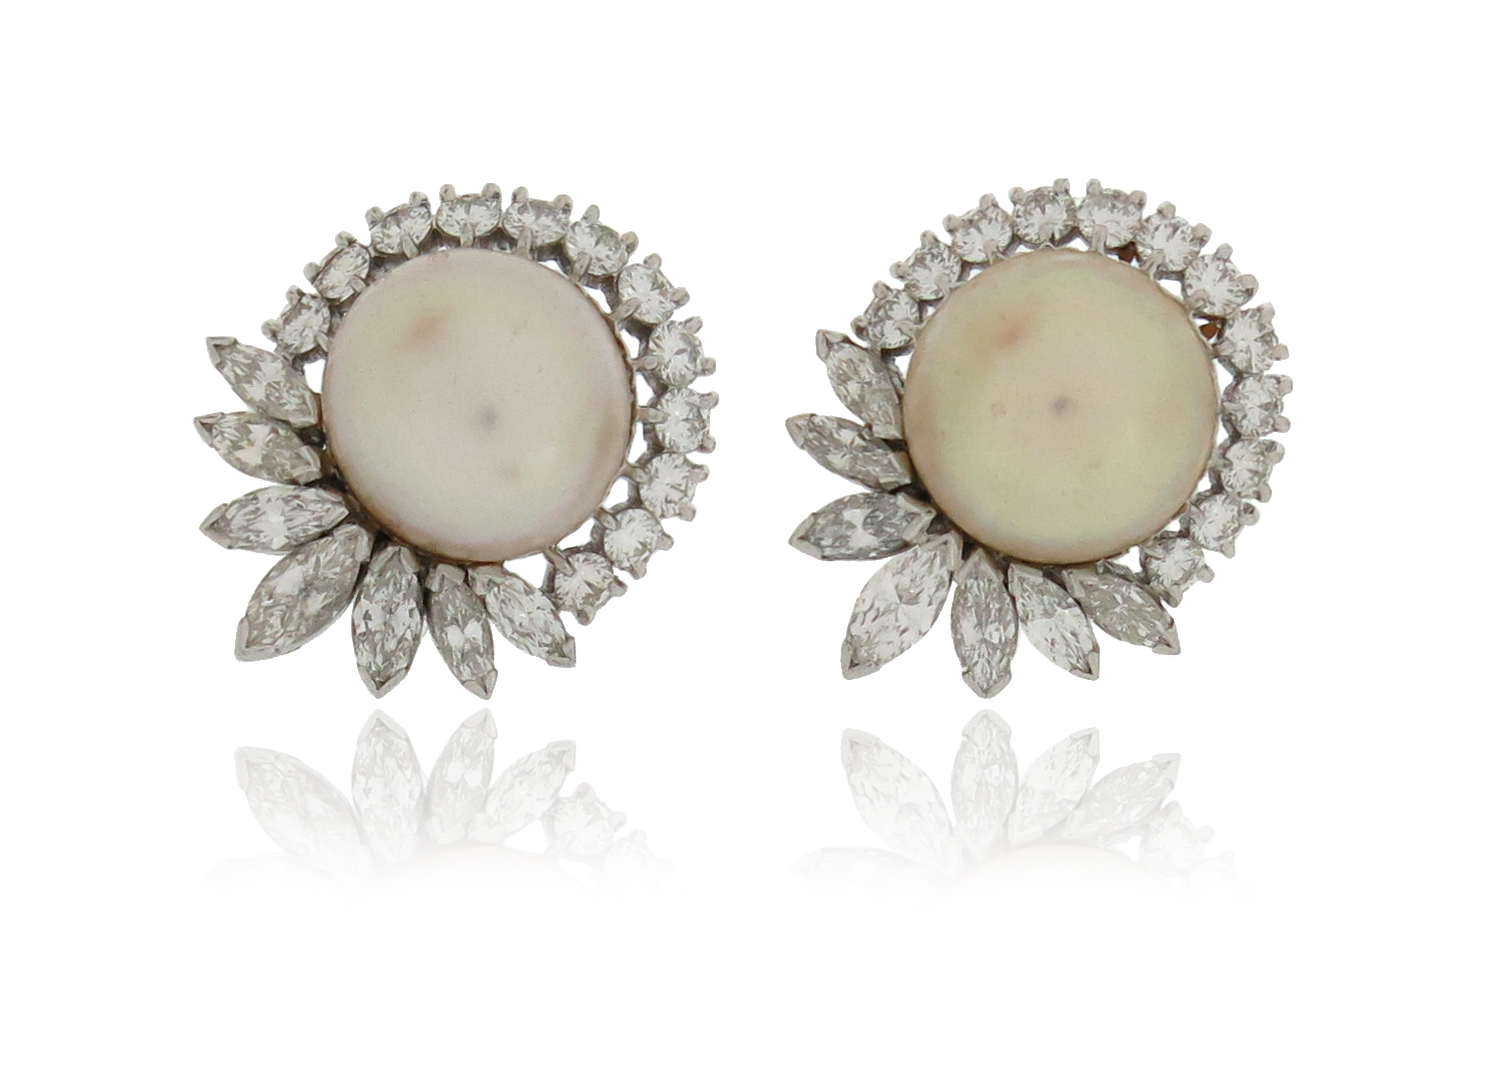 A pair of natural pearl and diamond cluster earrings, the button-shaped pearls are set within a - Image 3 of 5